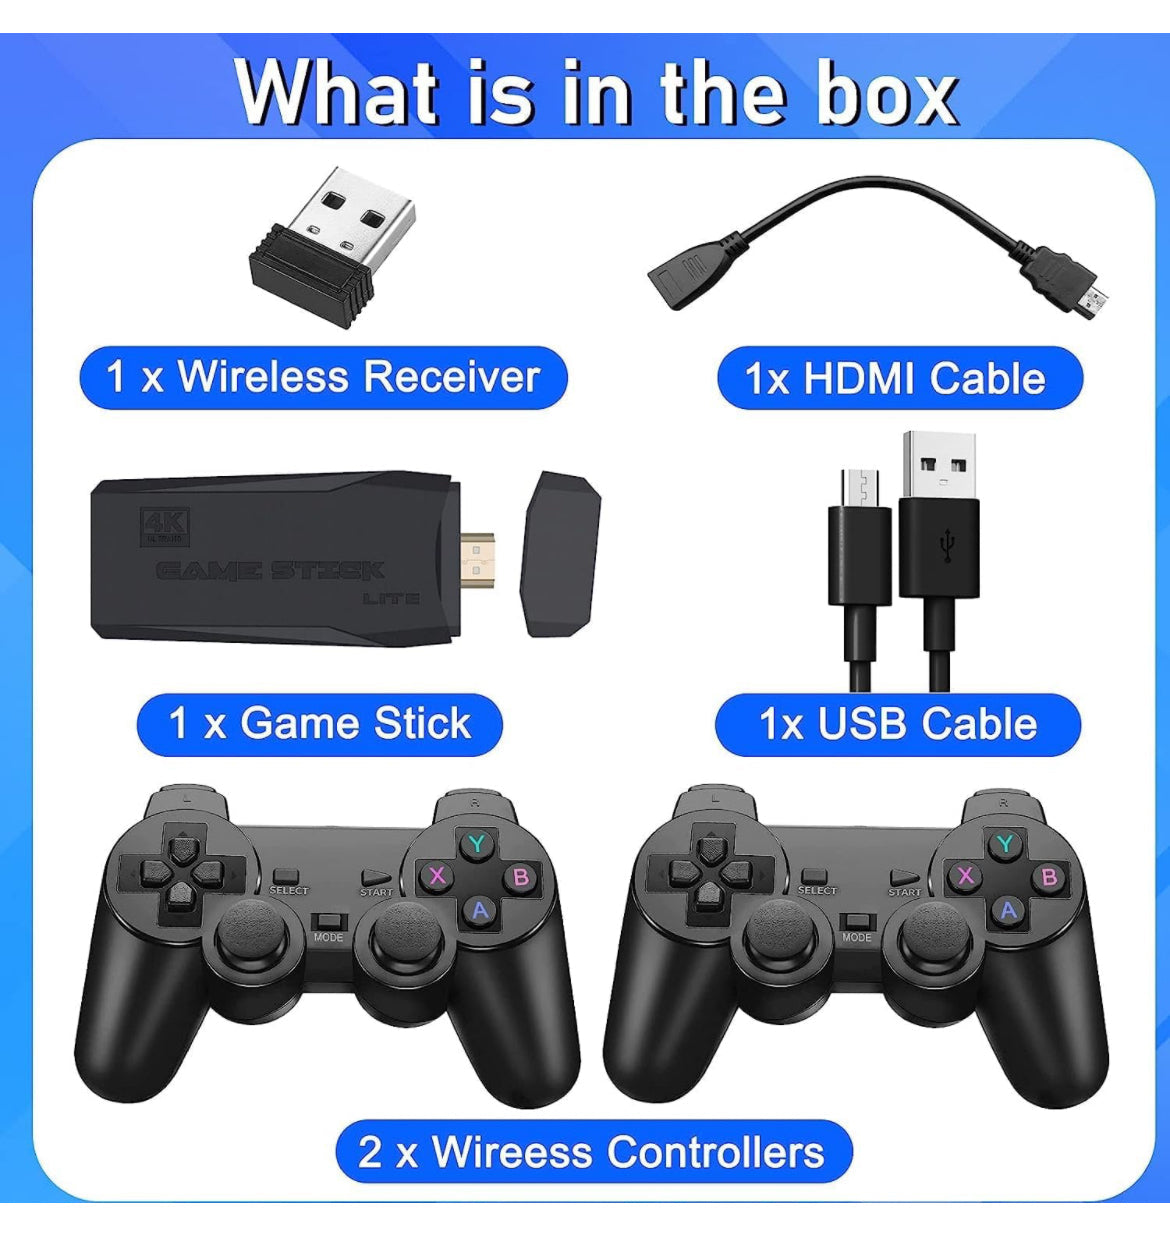 Playstation TV Video Game HDMI Console Stick 2.4g Wireless Gamepad Controller USB Built-in 4000 Classic - wireless console HDMI stick with 4000 games